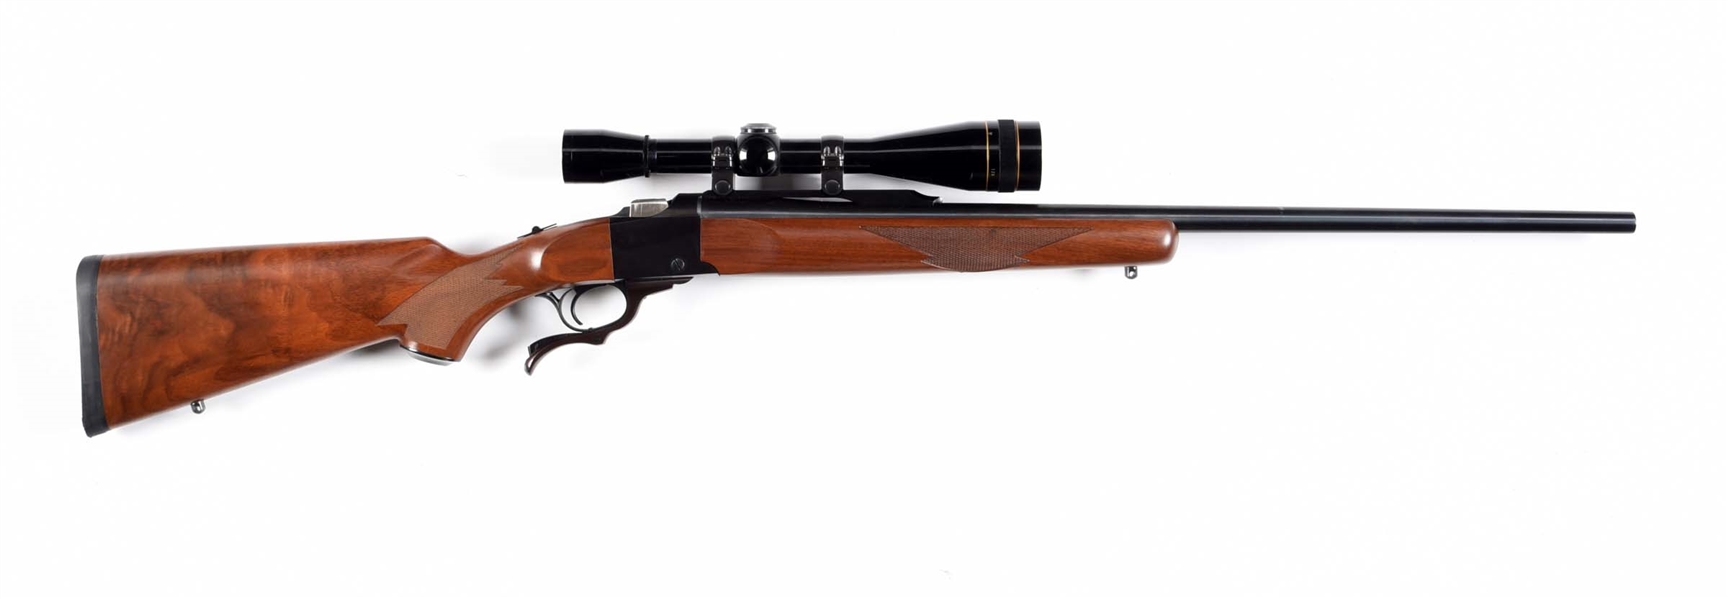 (M) RUGER NO. 1 SINGLE SHOT RIFLE IN .223 WITH LEUPOLD SCOPE.